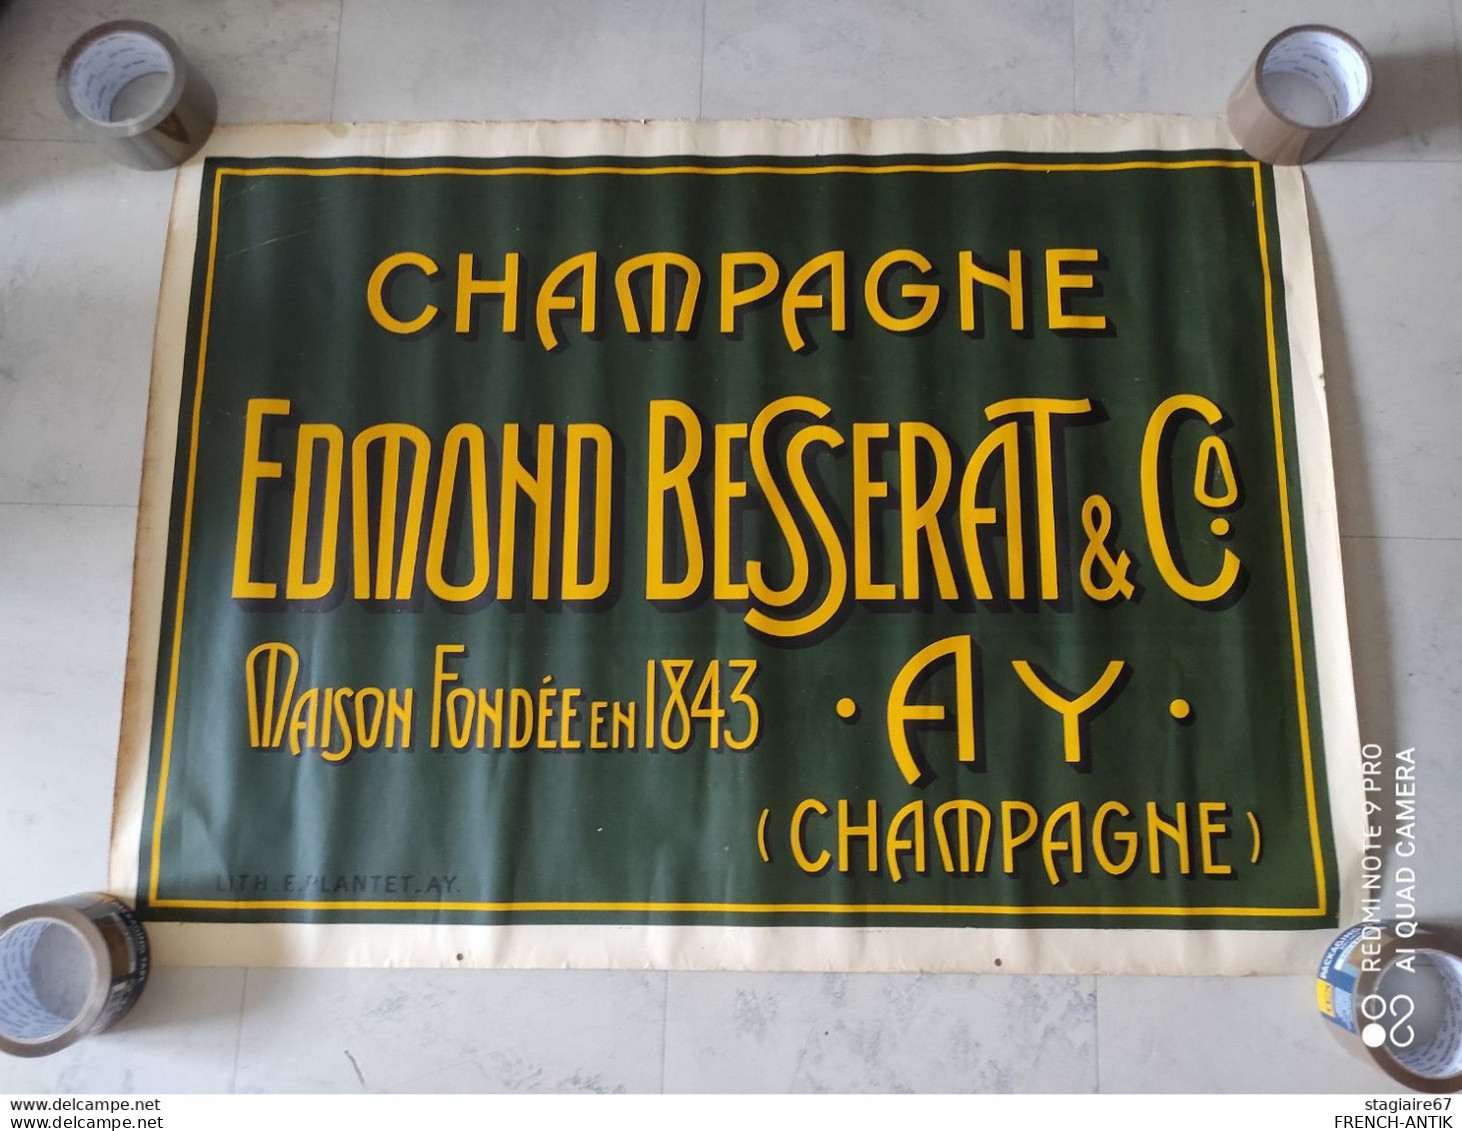 RARE AFFICHE CHAMPAGNE EDMOND BESSERAT AND CO AY MARNE FONDEE EN 1843 90X65CM - Plakate